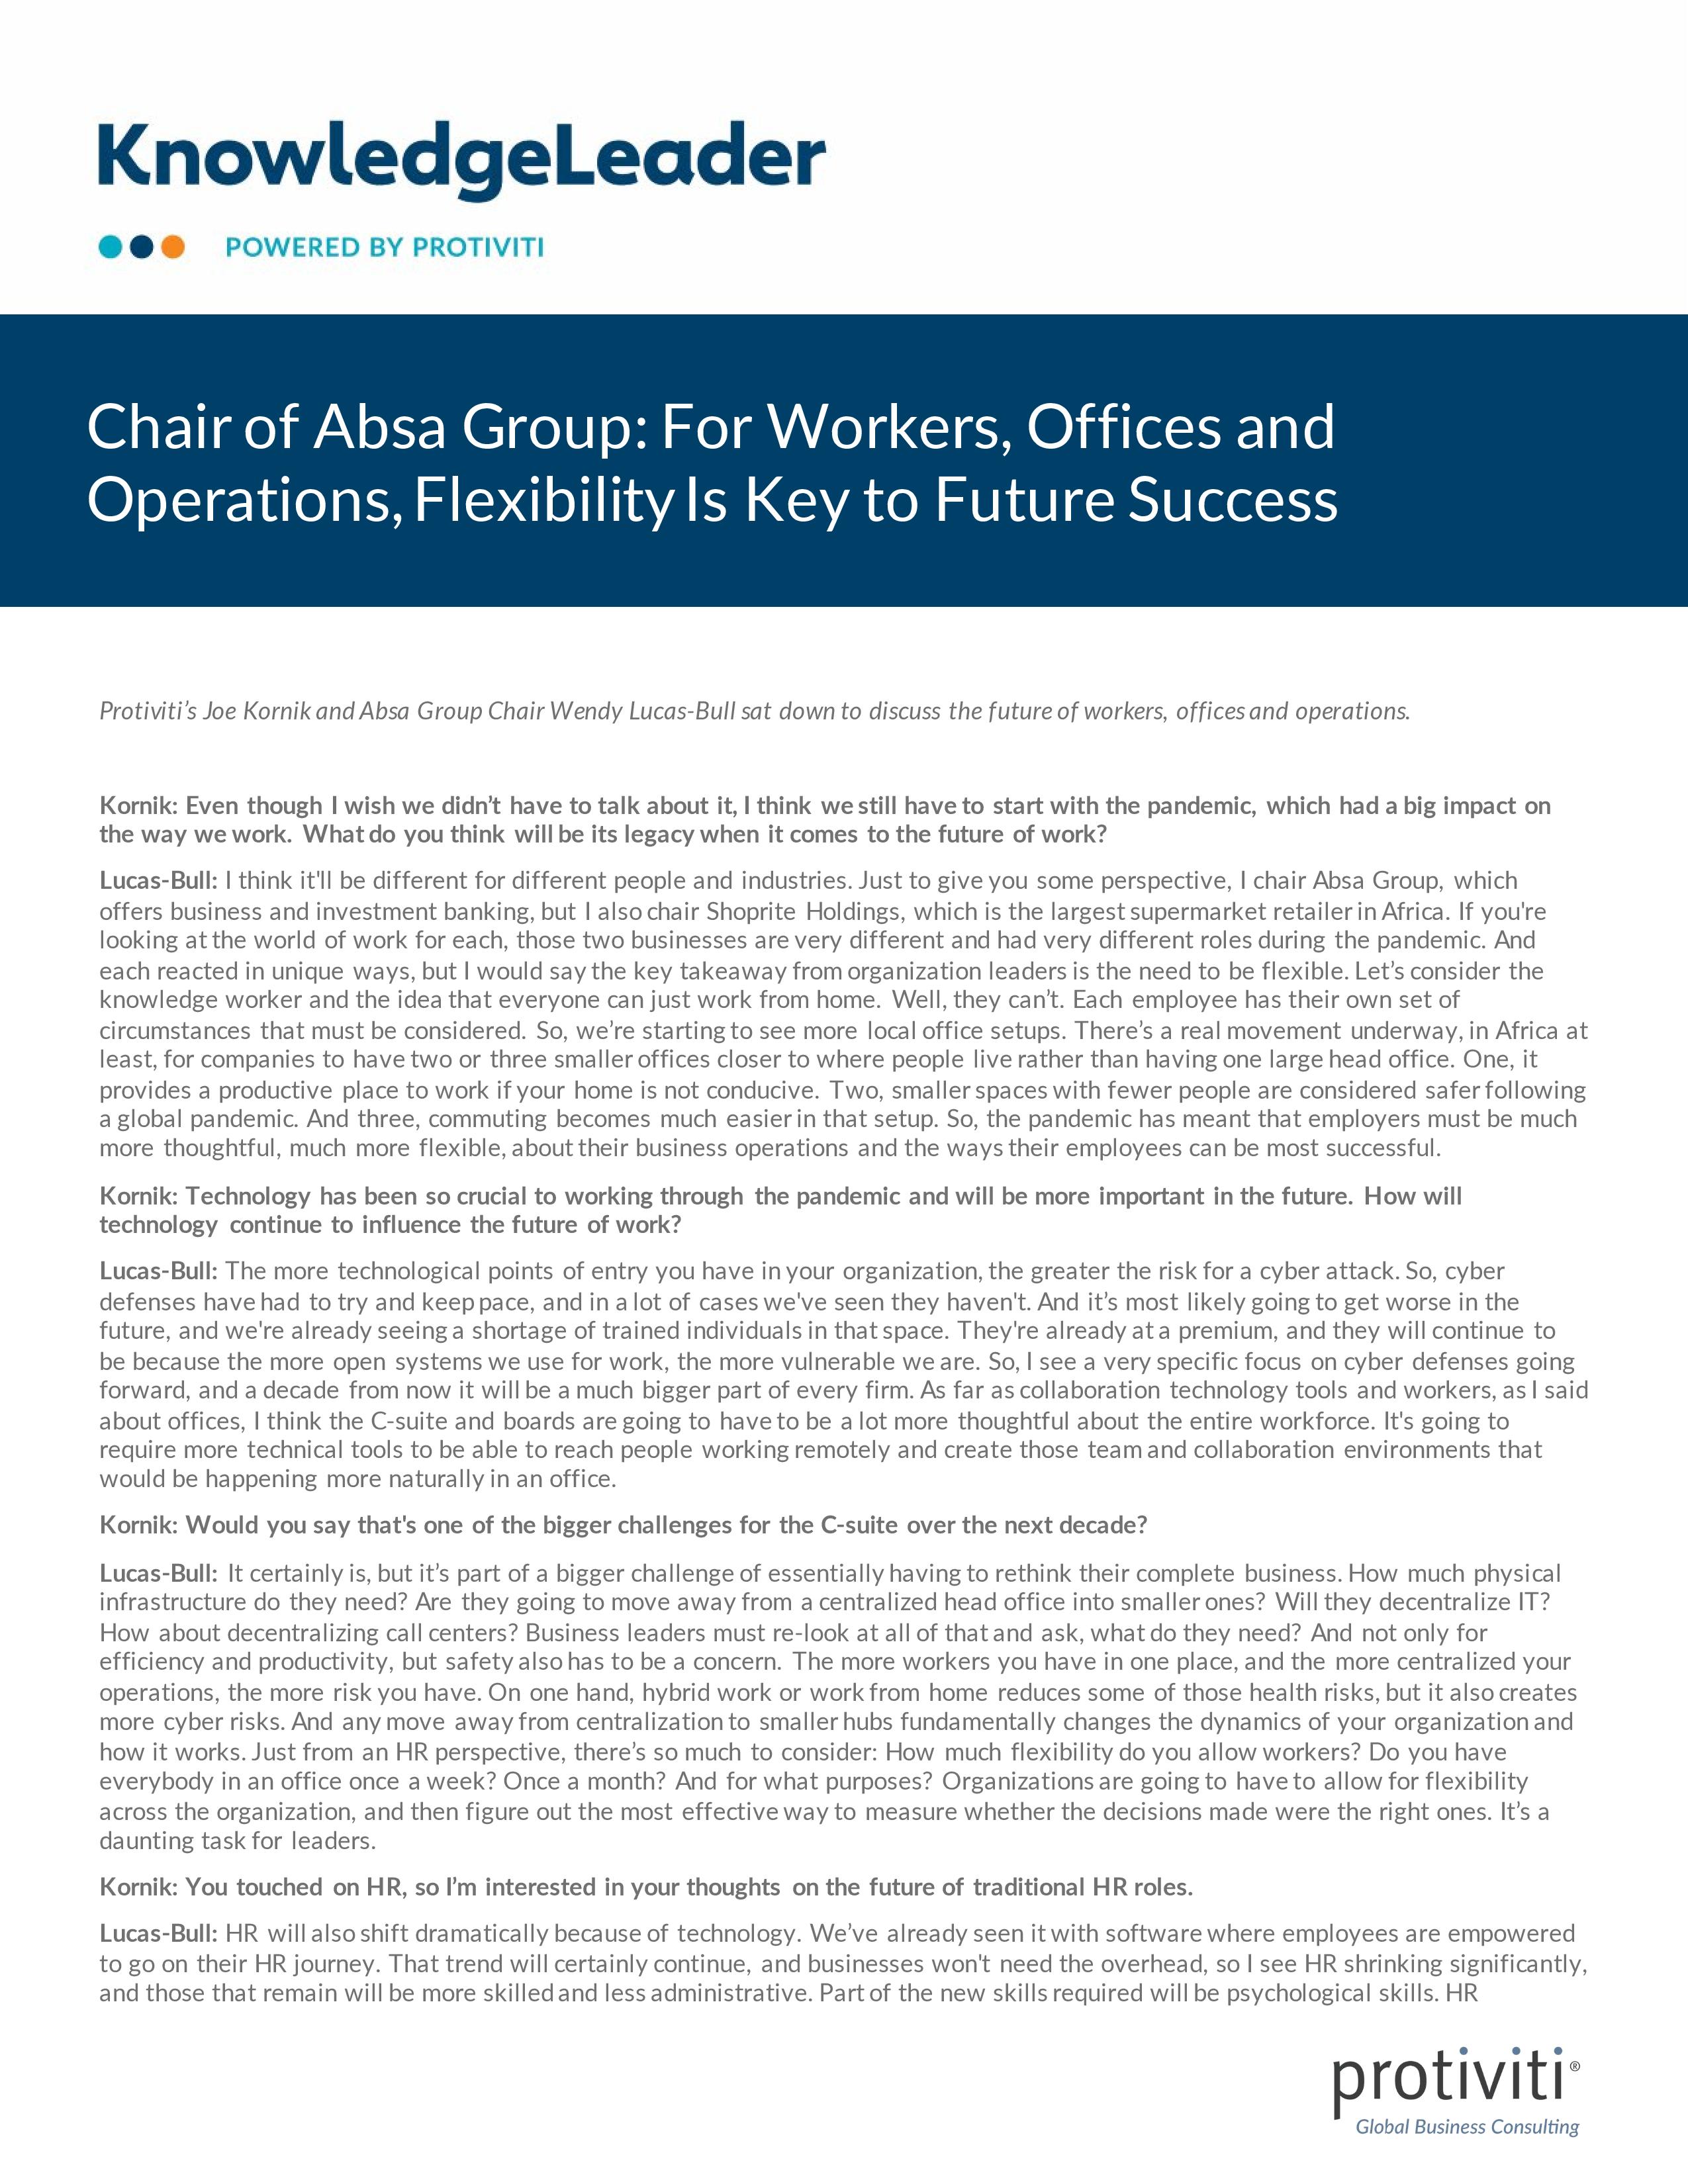 screenshot of the first page of Chair of Absa Group for Workers, Offices and Operations, Flexibility Is Key to Future Success